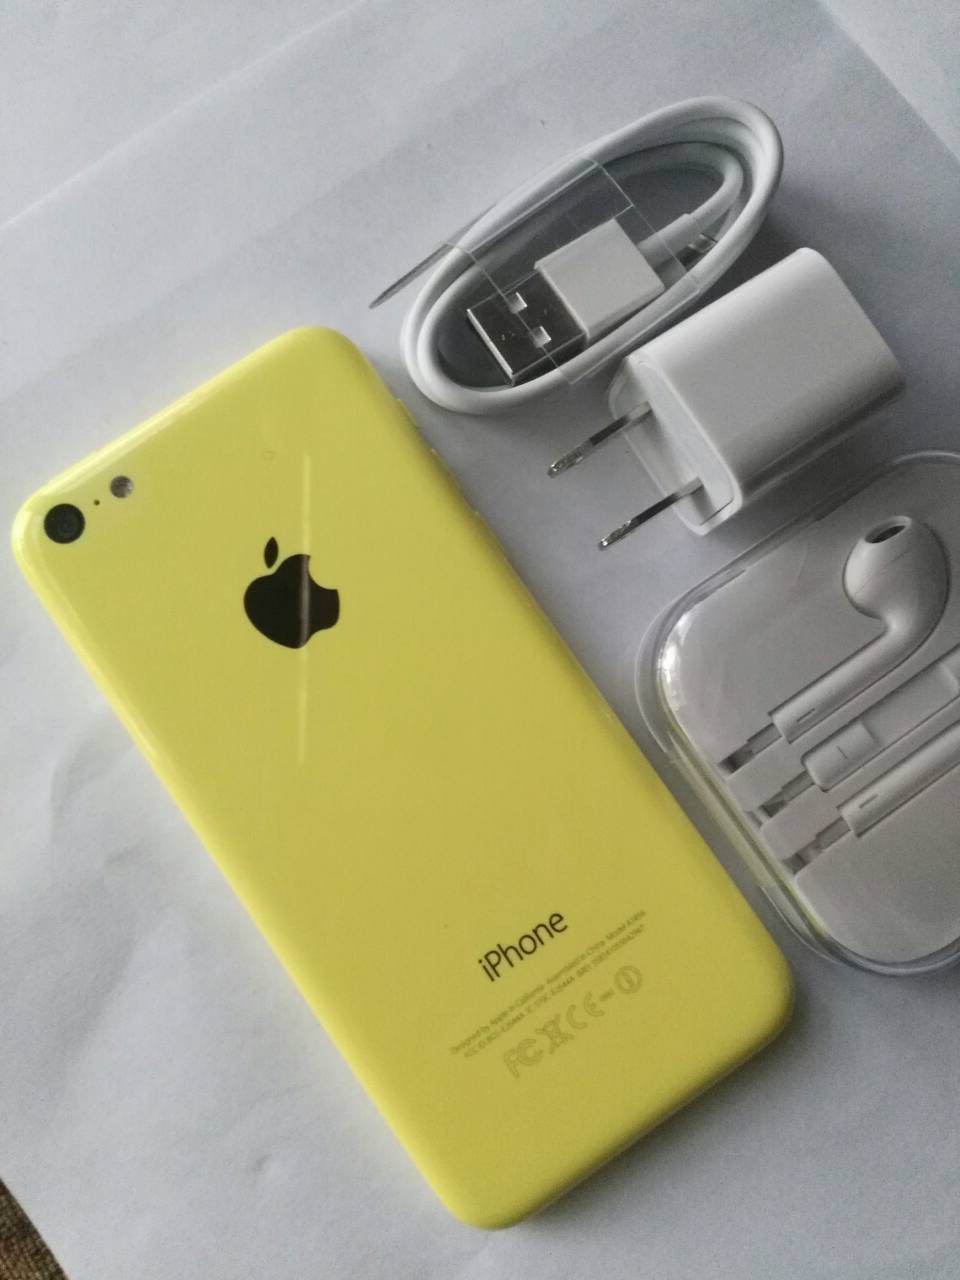 iPhone 5C. Factory Unlocked for Any SIM Any Country Any Carrier